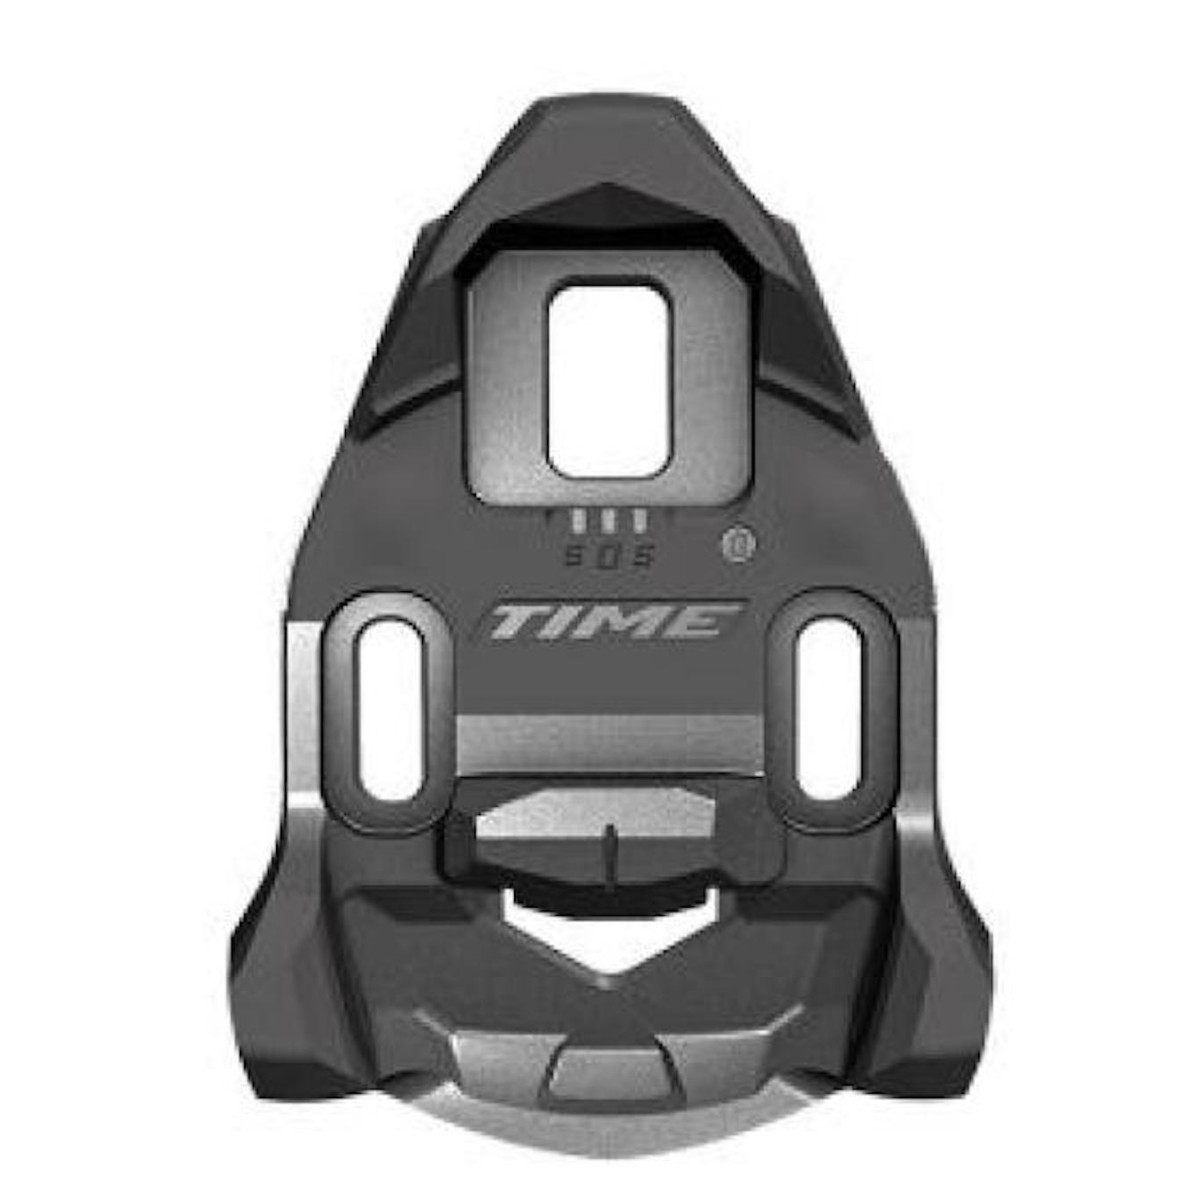 TIME XPRO/XPRESSO ICLIC FREE pedal cleats